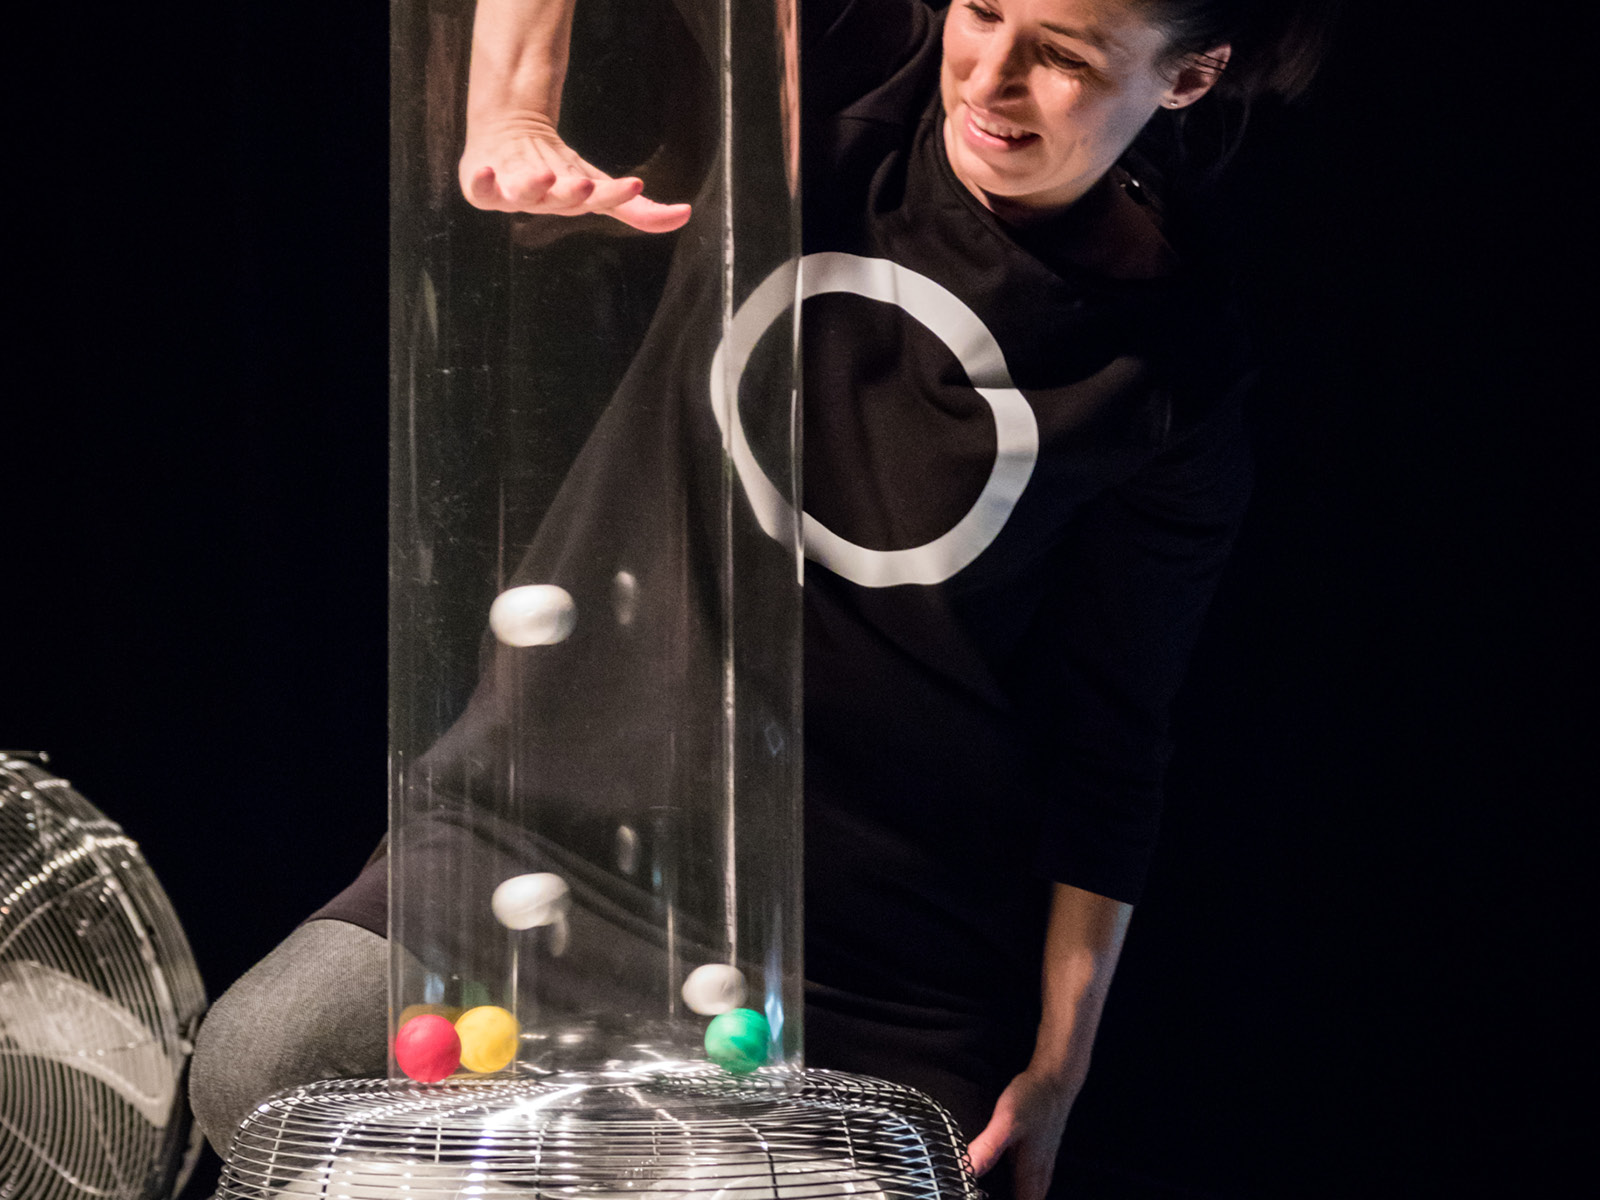 One of the performers regulates the trajectory of several small balls blown upwards by a fan by pushing her hand into the transparent tube in which the balls fly.